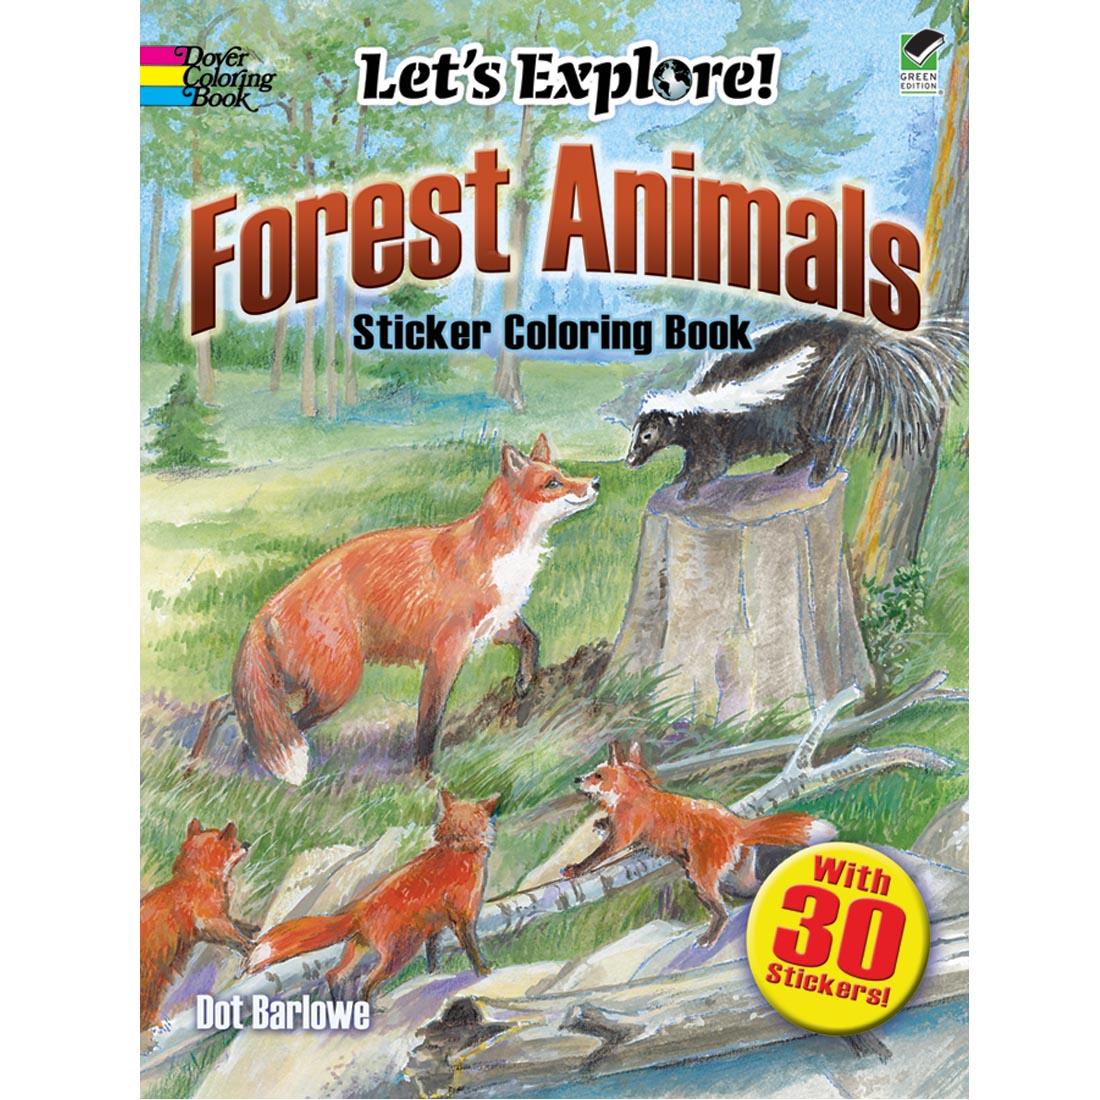 Let's Explore! Forest Animals Sticker Coloring Book by Dover